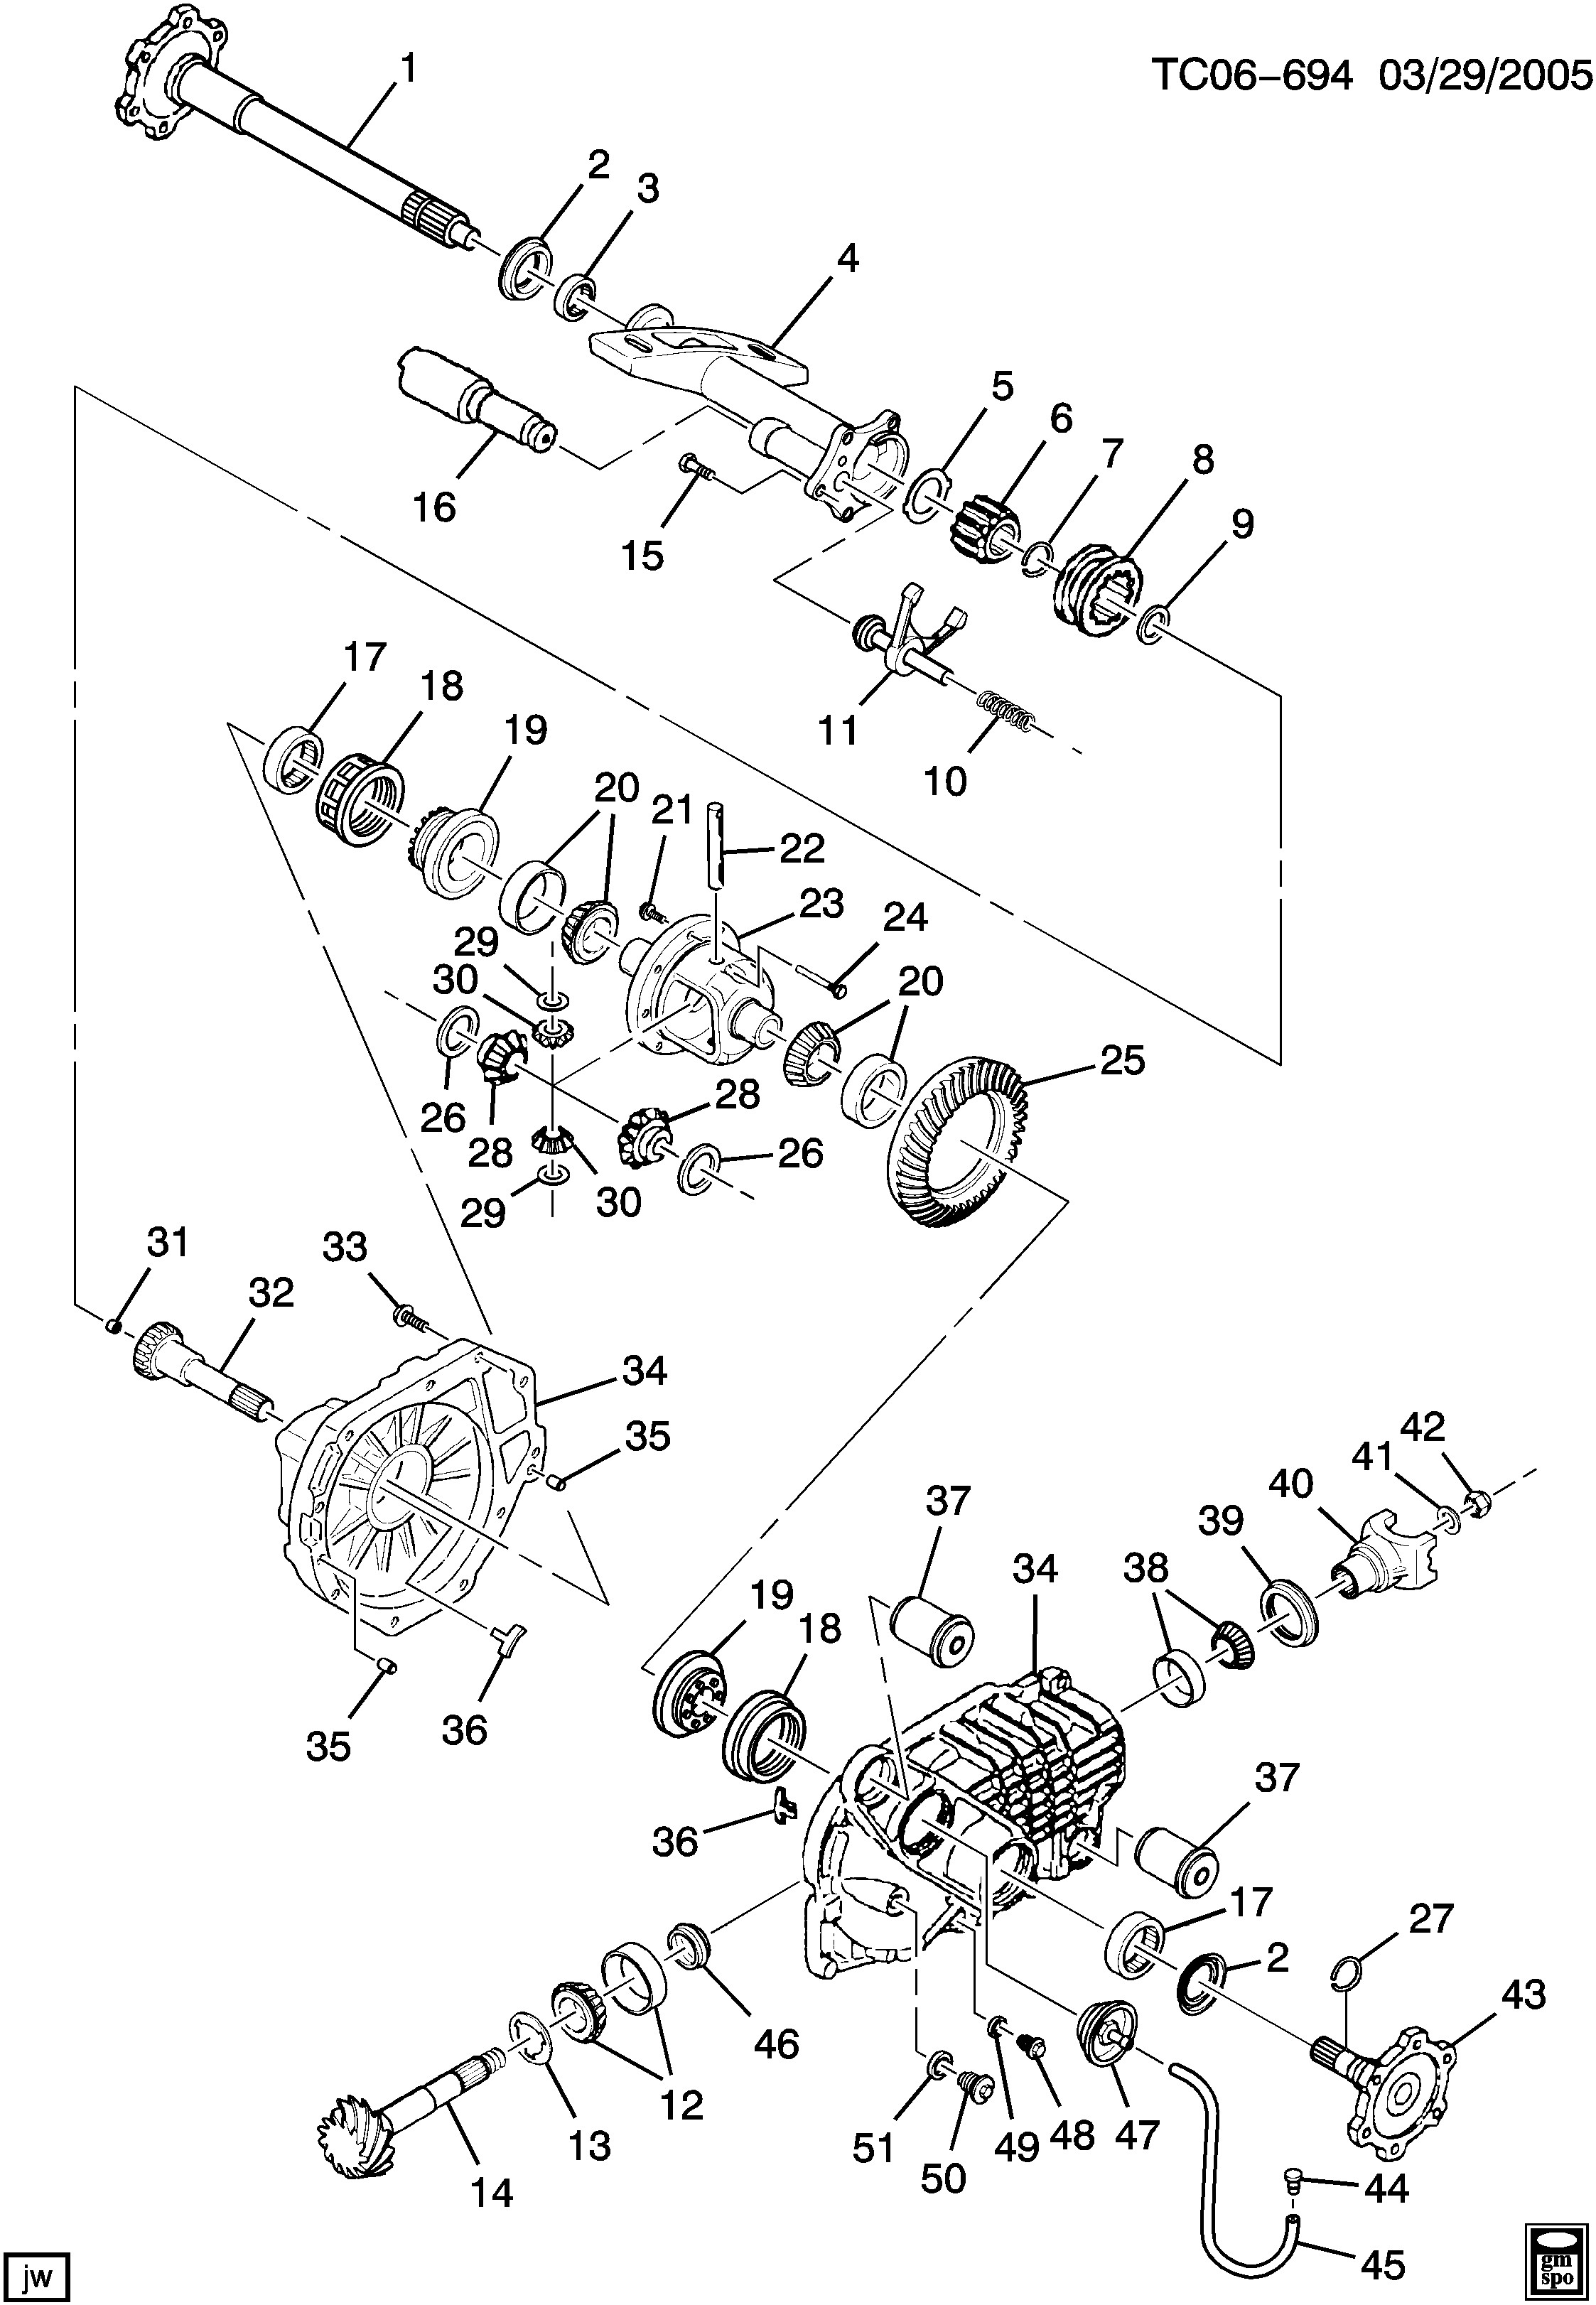 2002 Chevy Avalanche Parts Diagram Avalanche 1500 4wd Differential Carrier Front Axle Part 2 8 25 Of 2002 Chevy Avalanche Parts Diagram